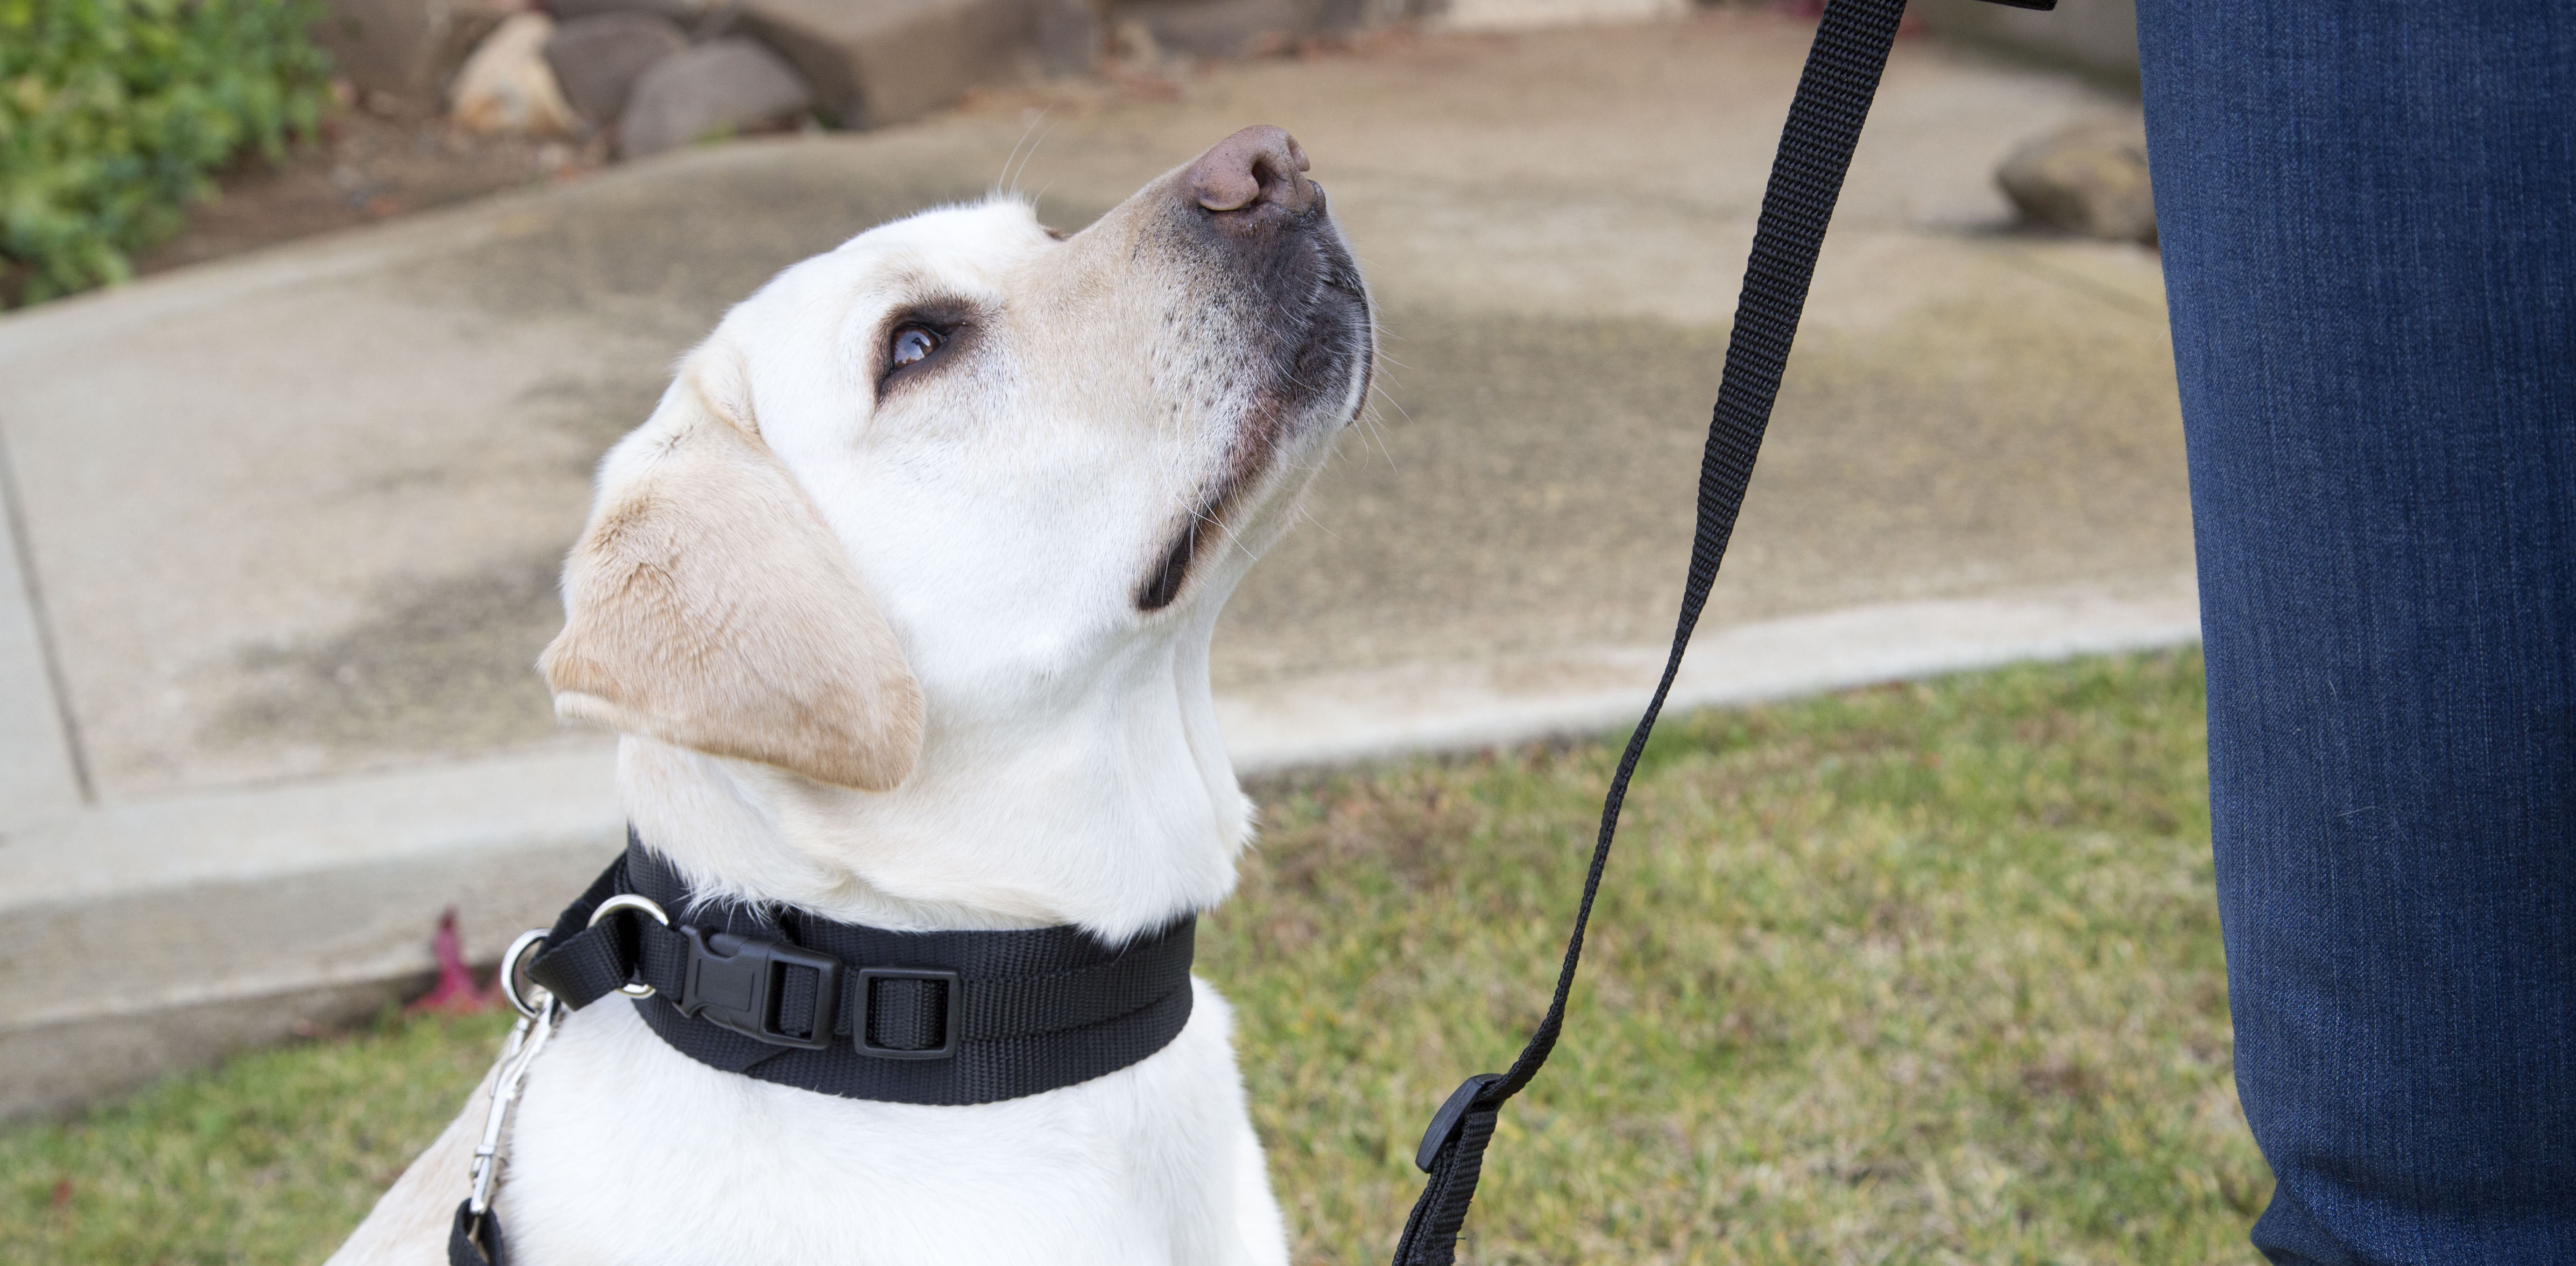 photo of a white Labrador dog wearing a black collar and leash during a dog training session